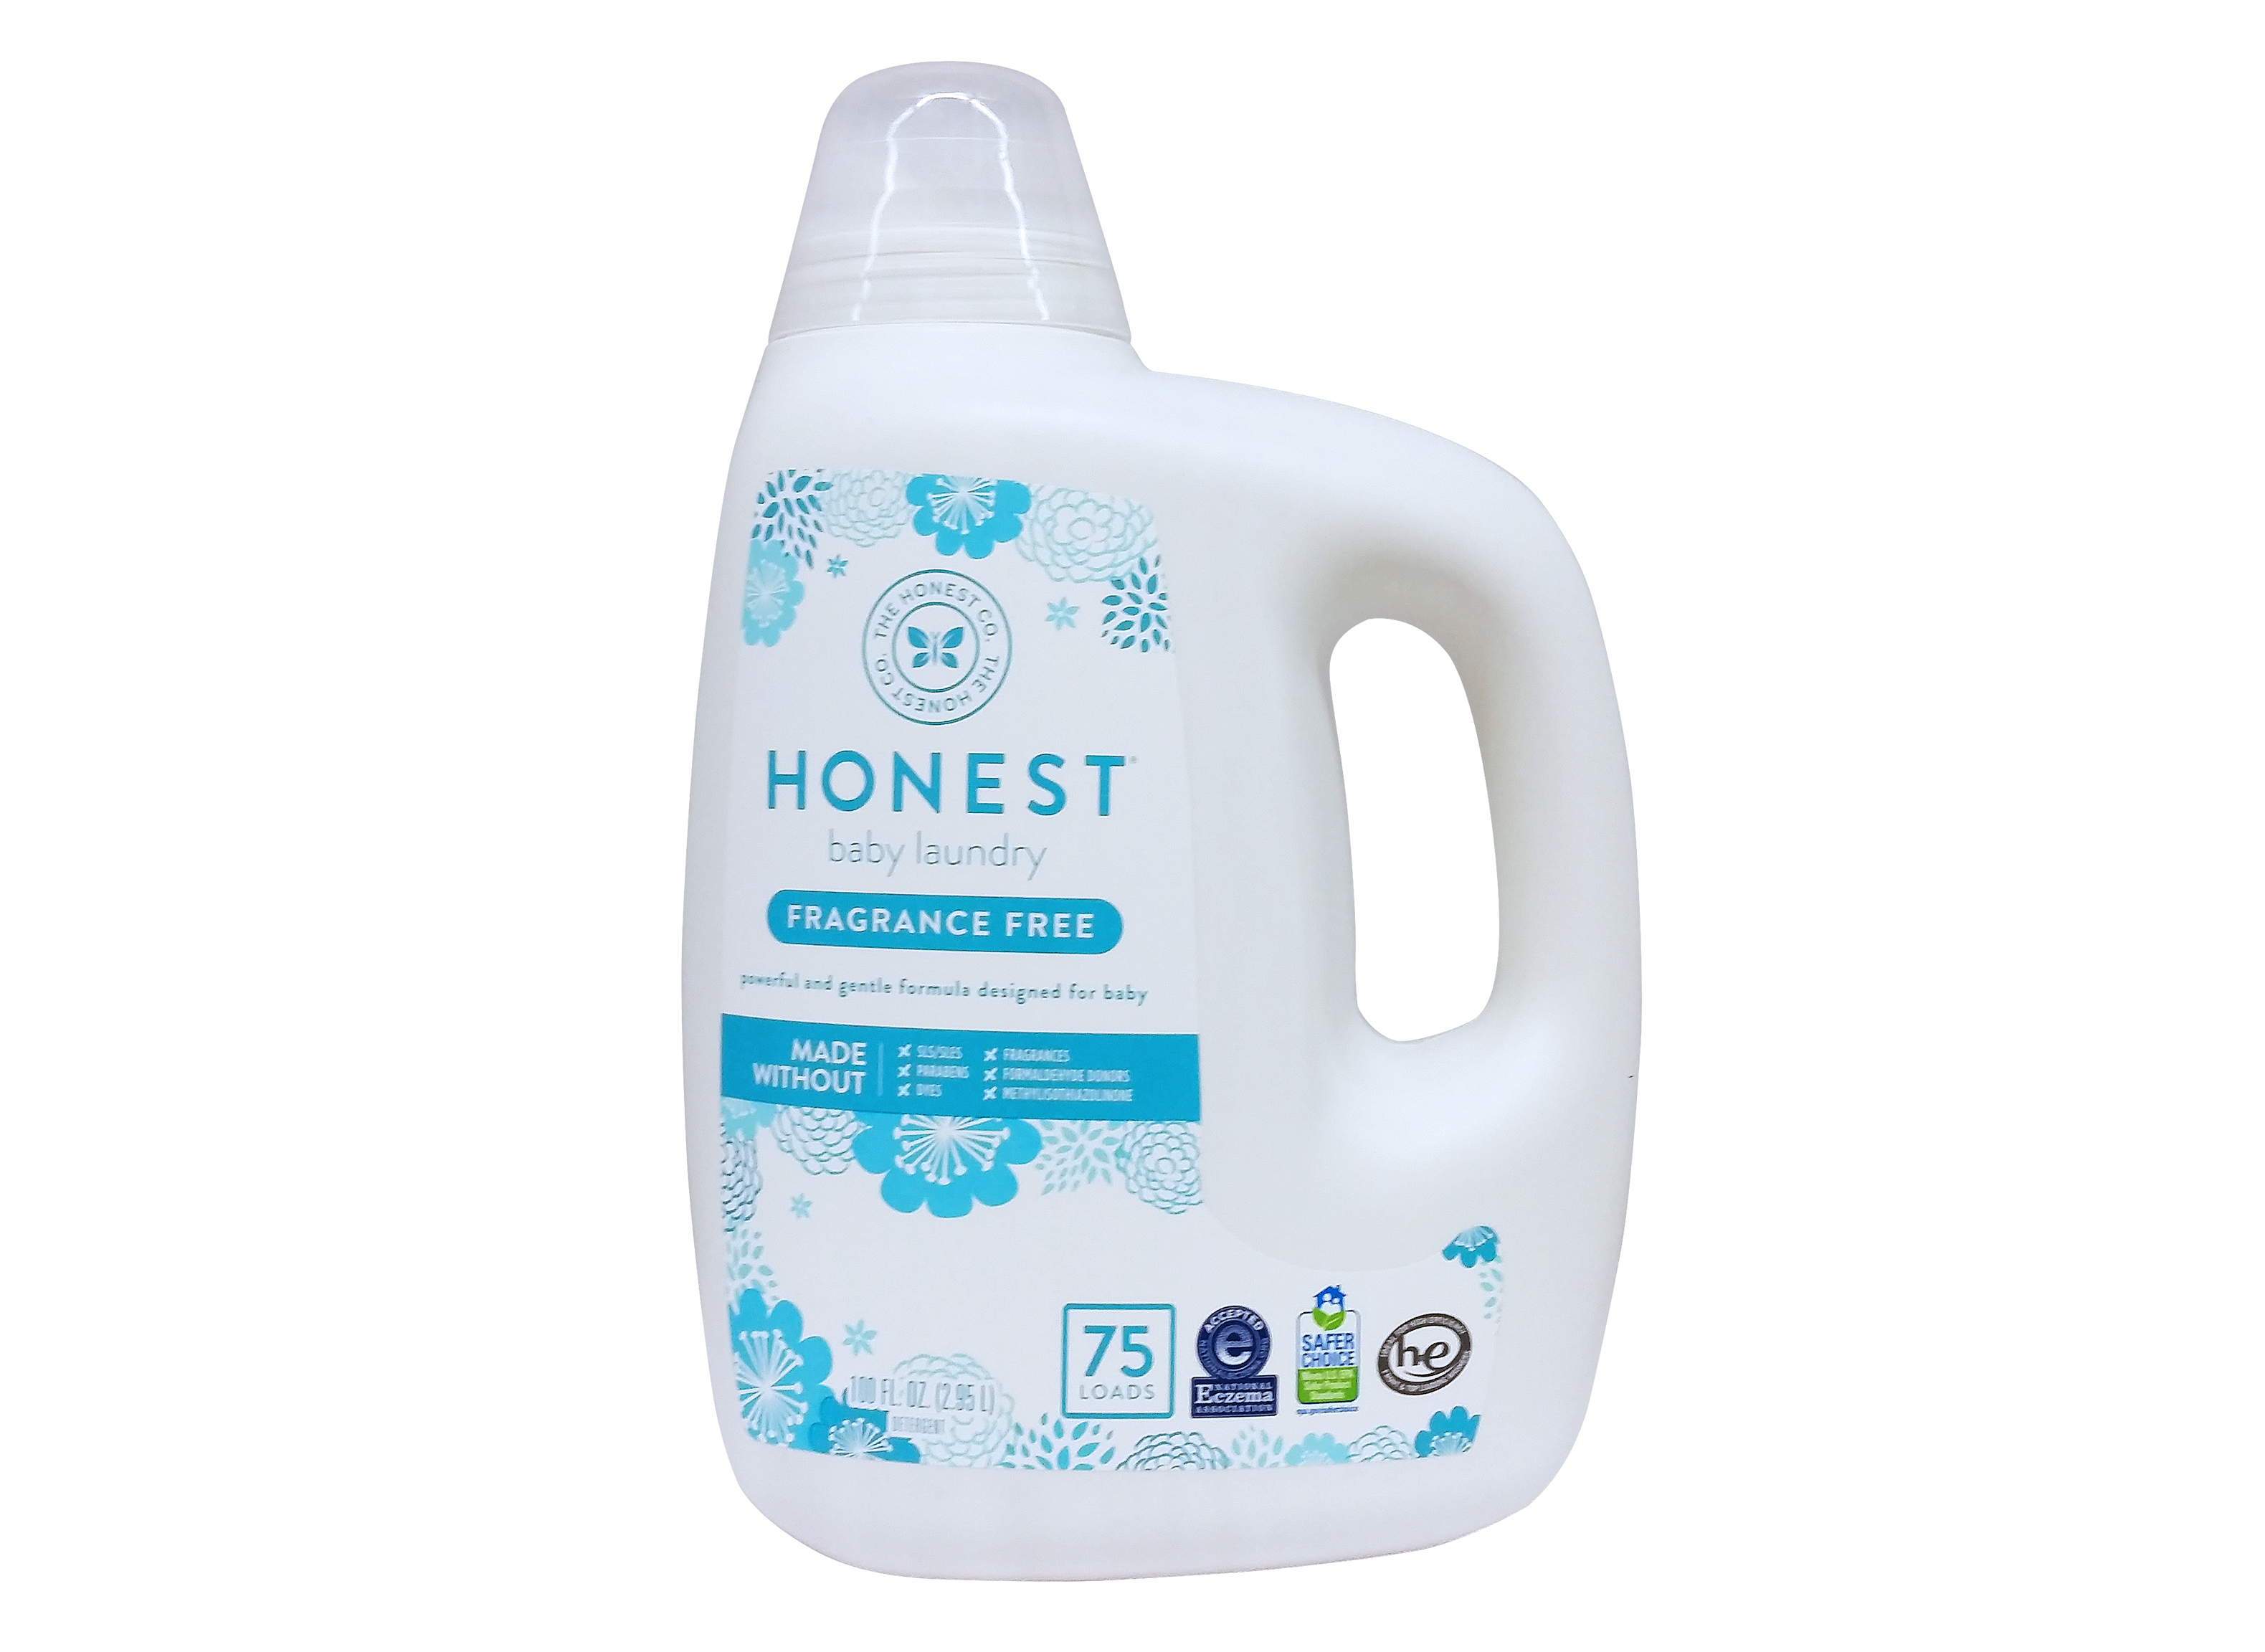 The Honest Company Baby Laundry Fragrance Free Laundry Detergent